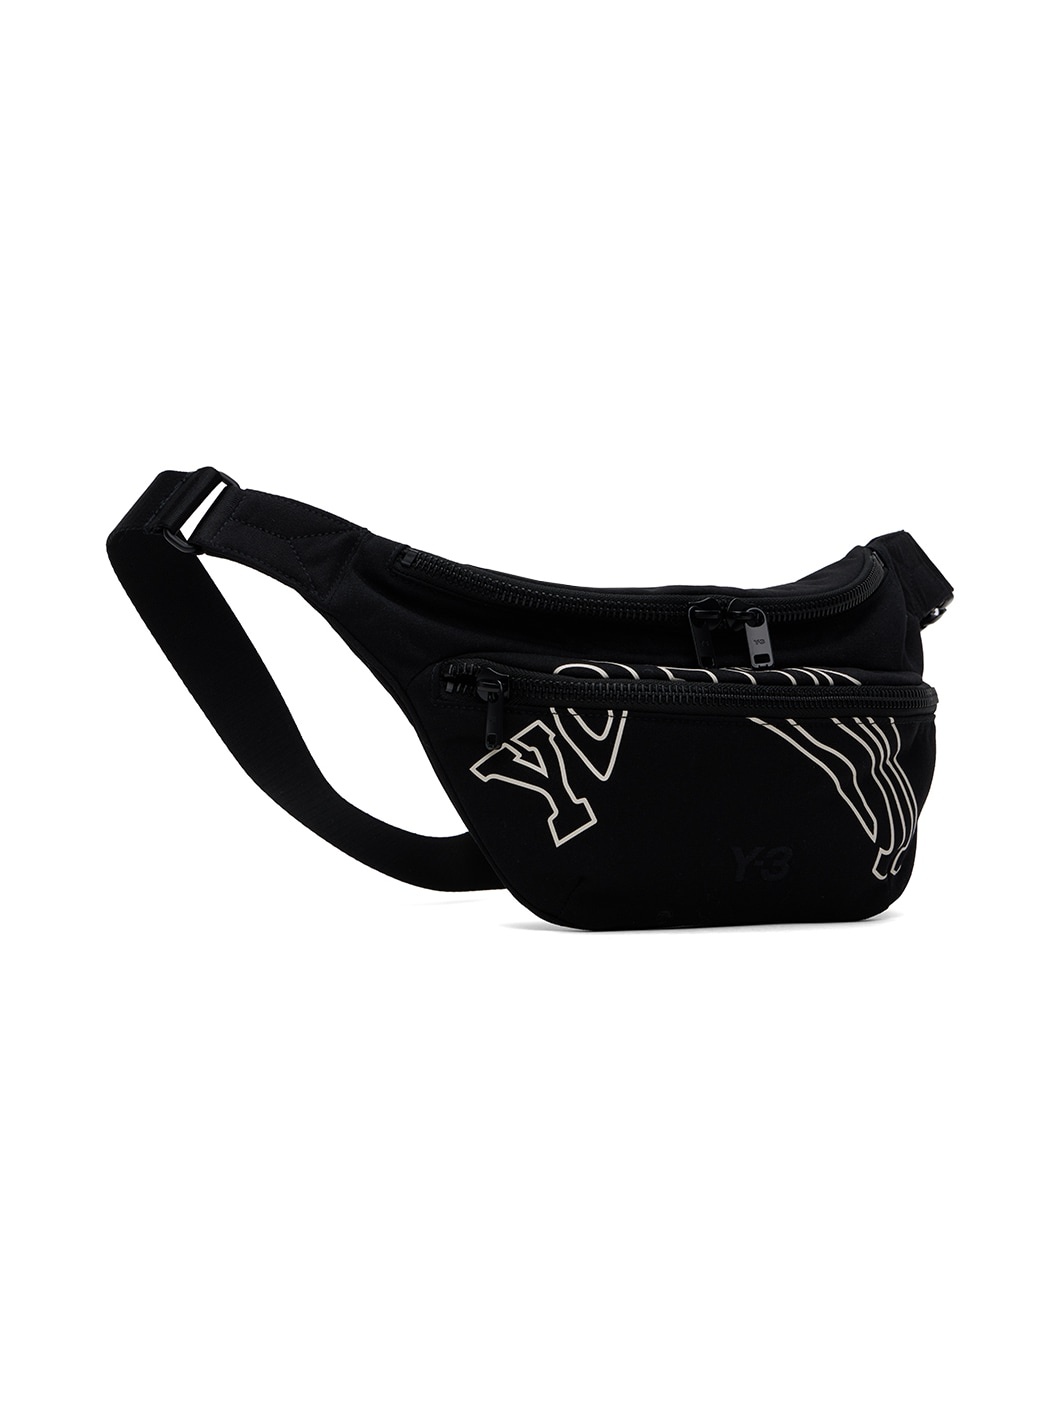 Black Morphed Pouch - 2